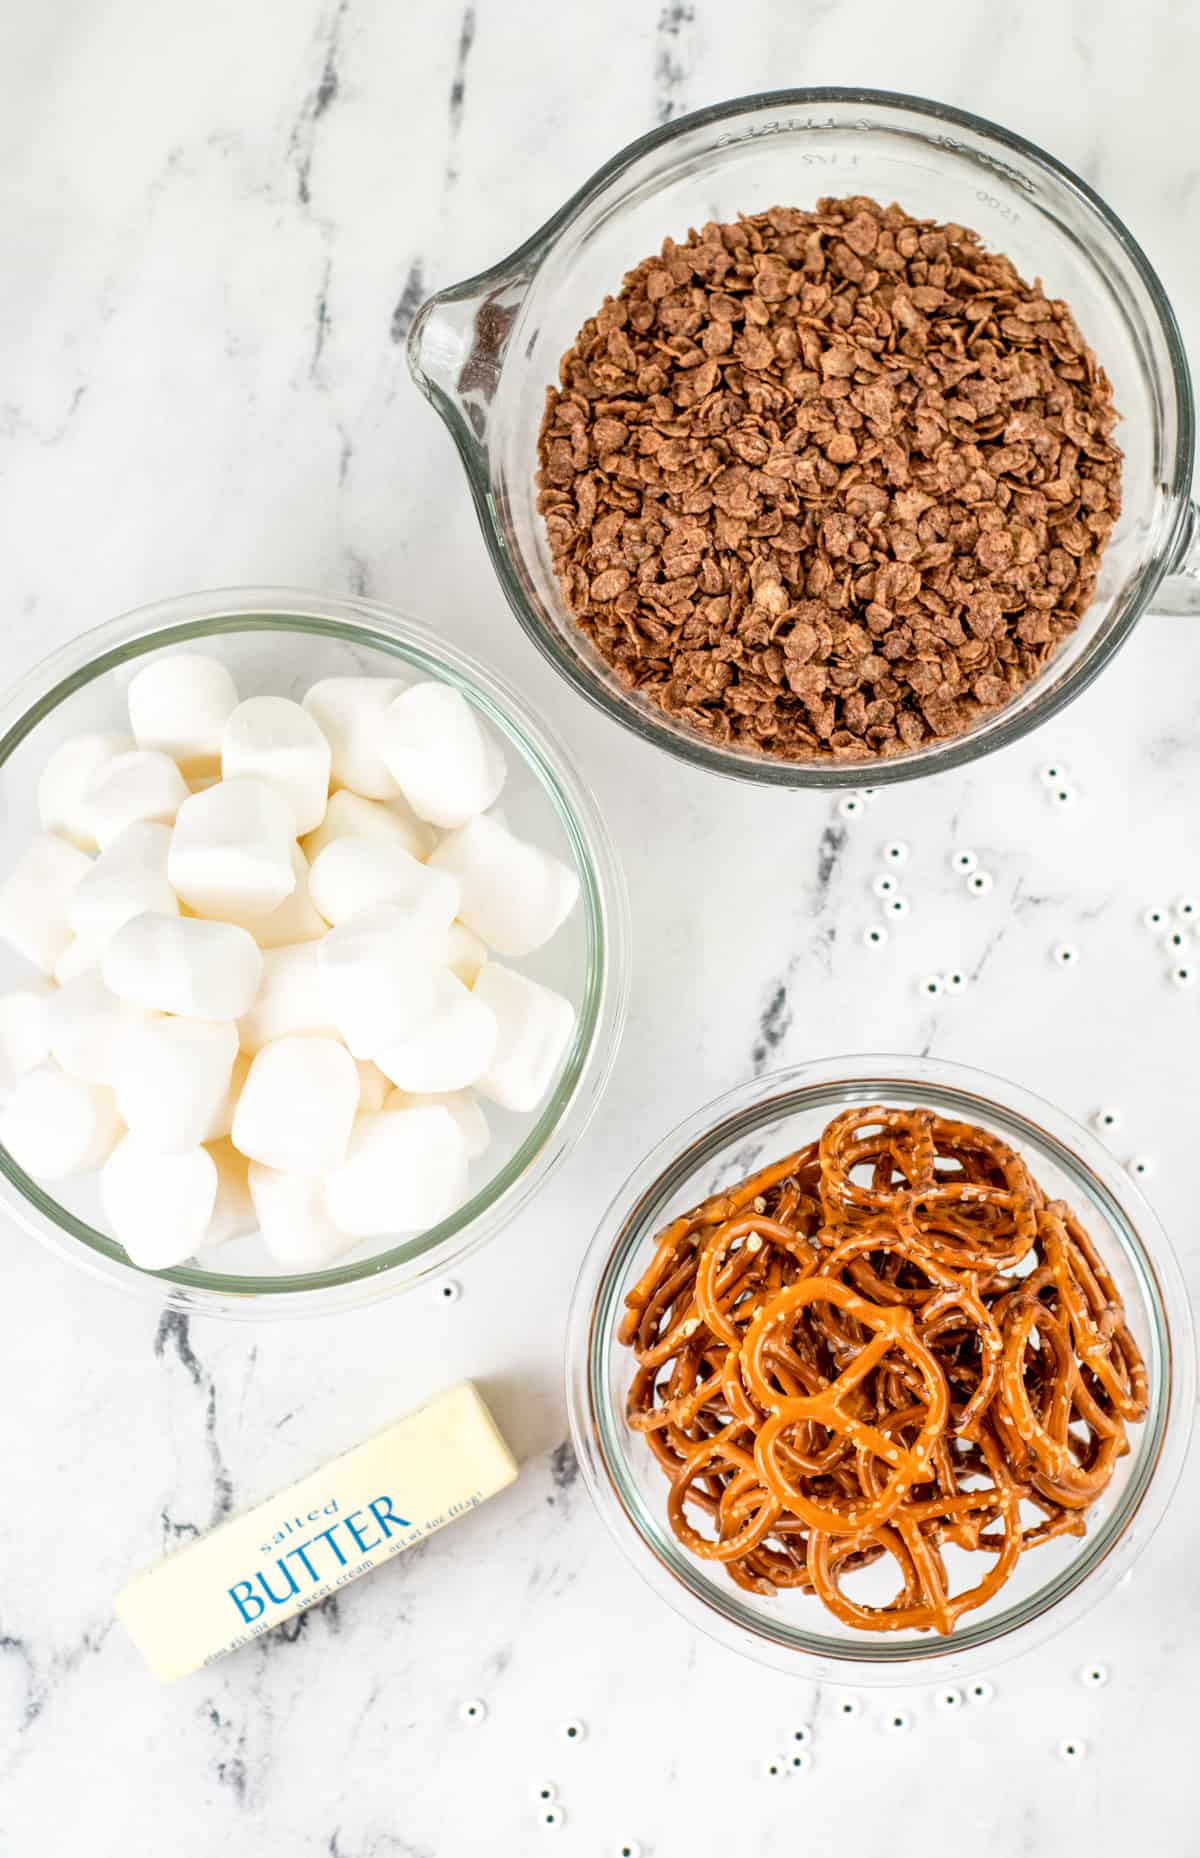 Spider Krisipies Treat Ingredients on countertop: bowl of marshmallows, bowl of chocolate krispy cereal, stick of butter, bowl of thin pretzels